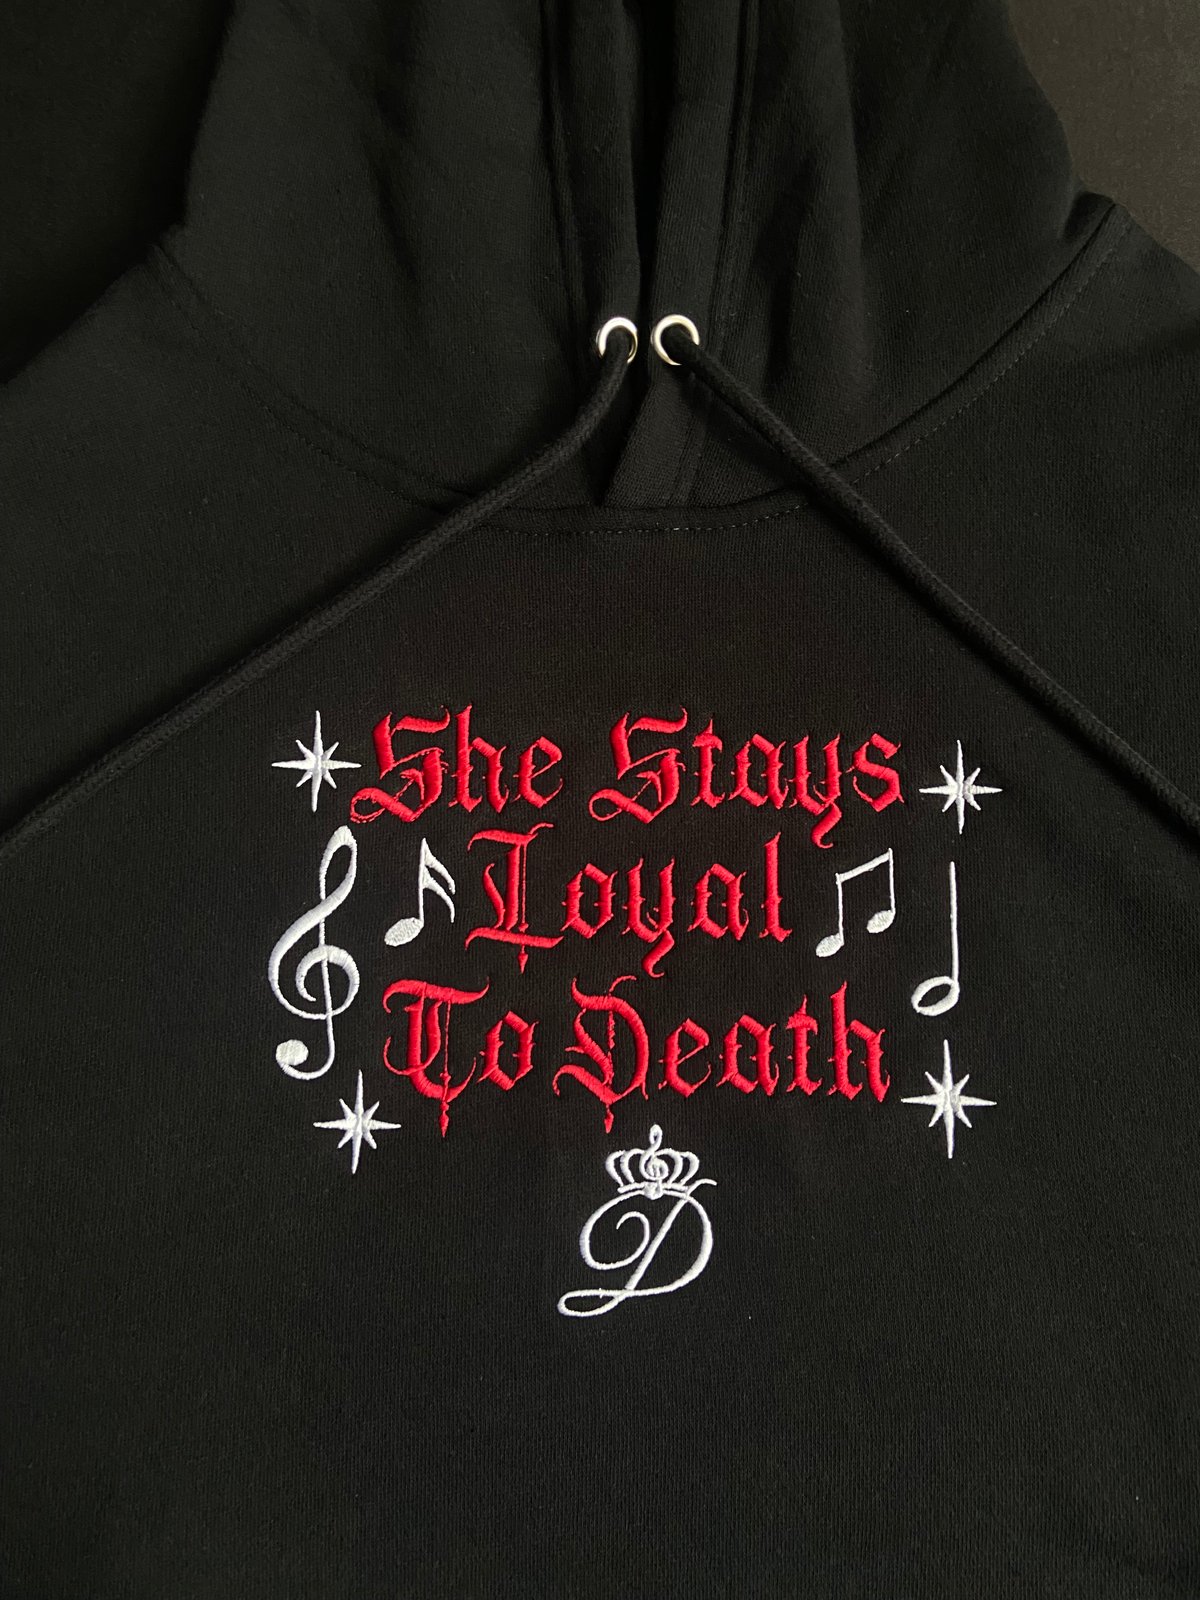 Image of “She Stays Loyal To Death” Hoodie with stars & music notes embroidered (on center of chest)